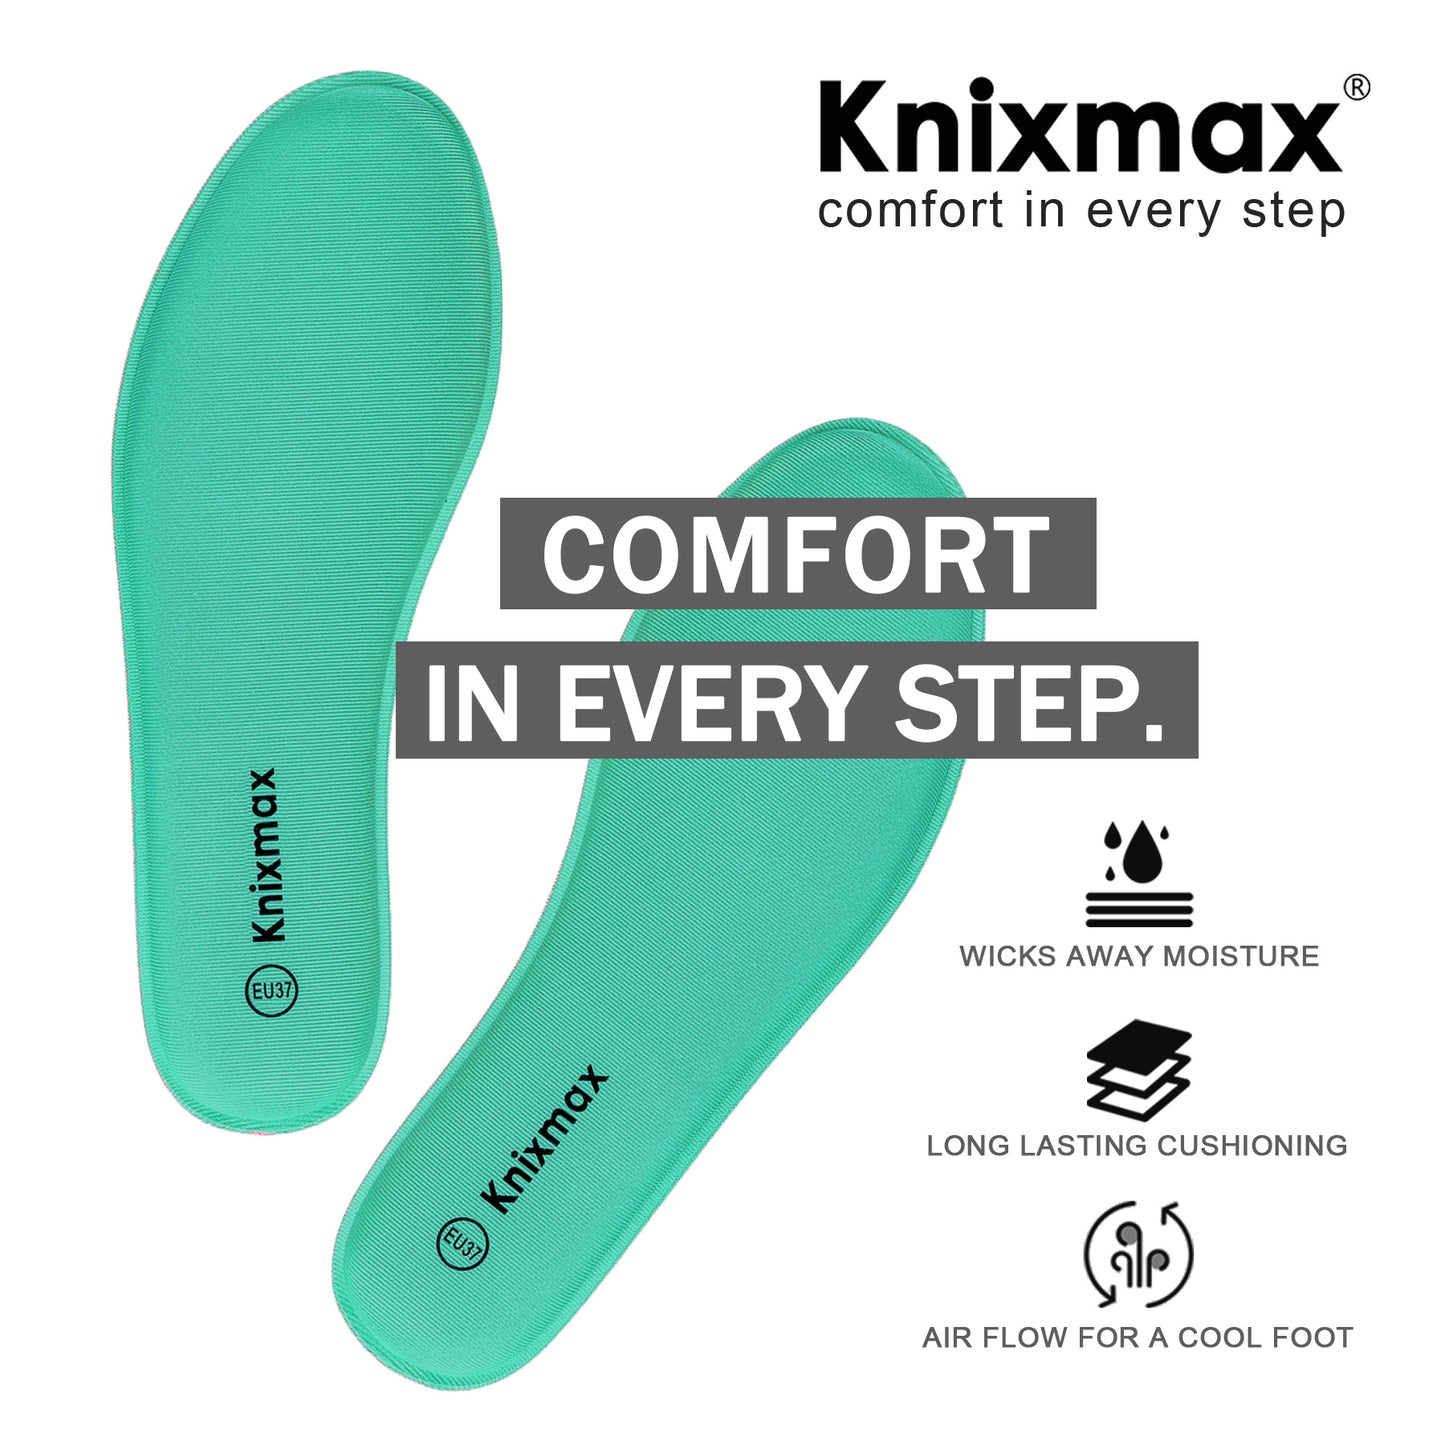 Knixmax Women's Memory Foam Insoles, Green, for Athletic Shoes & Sneakers